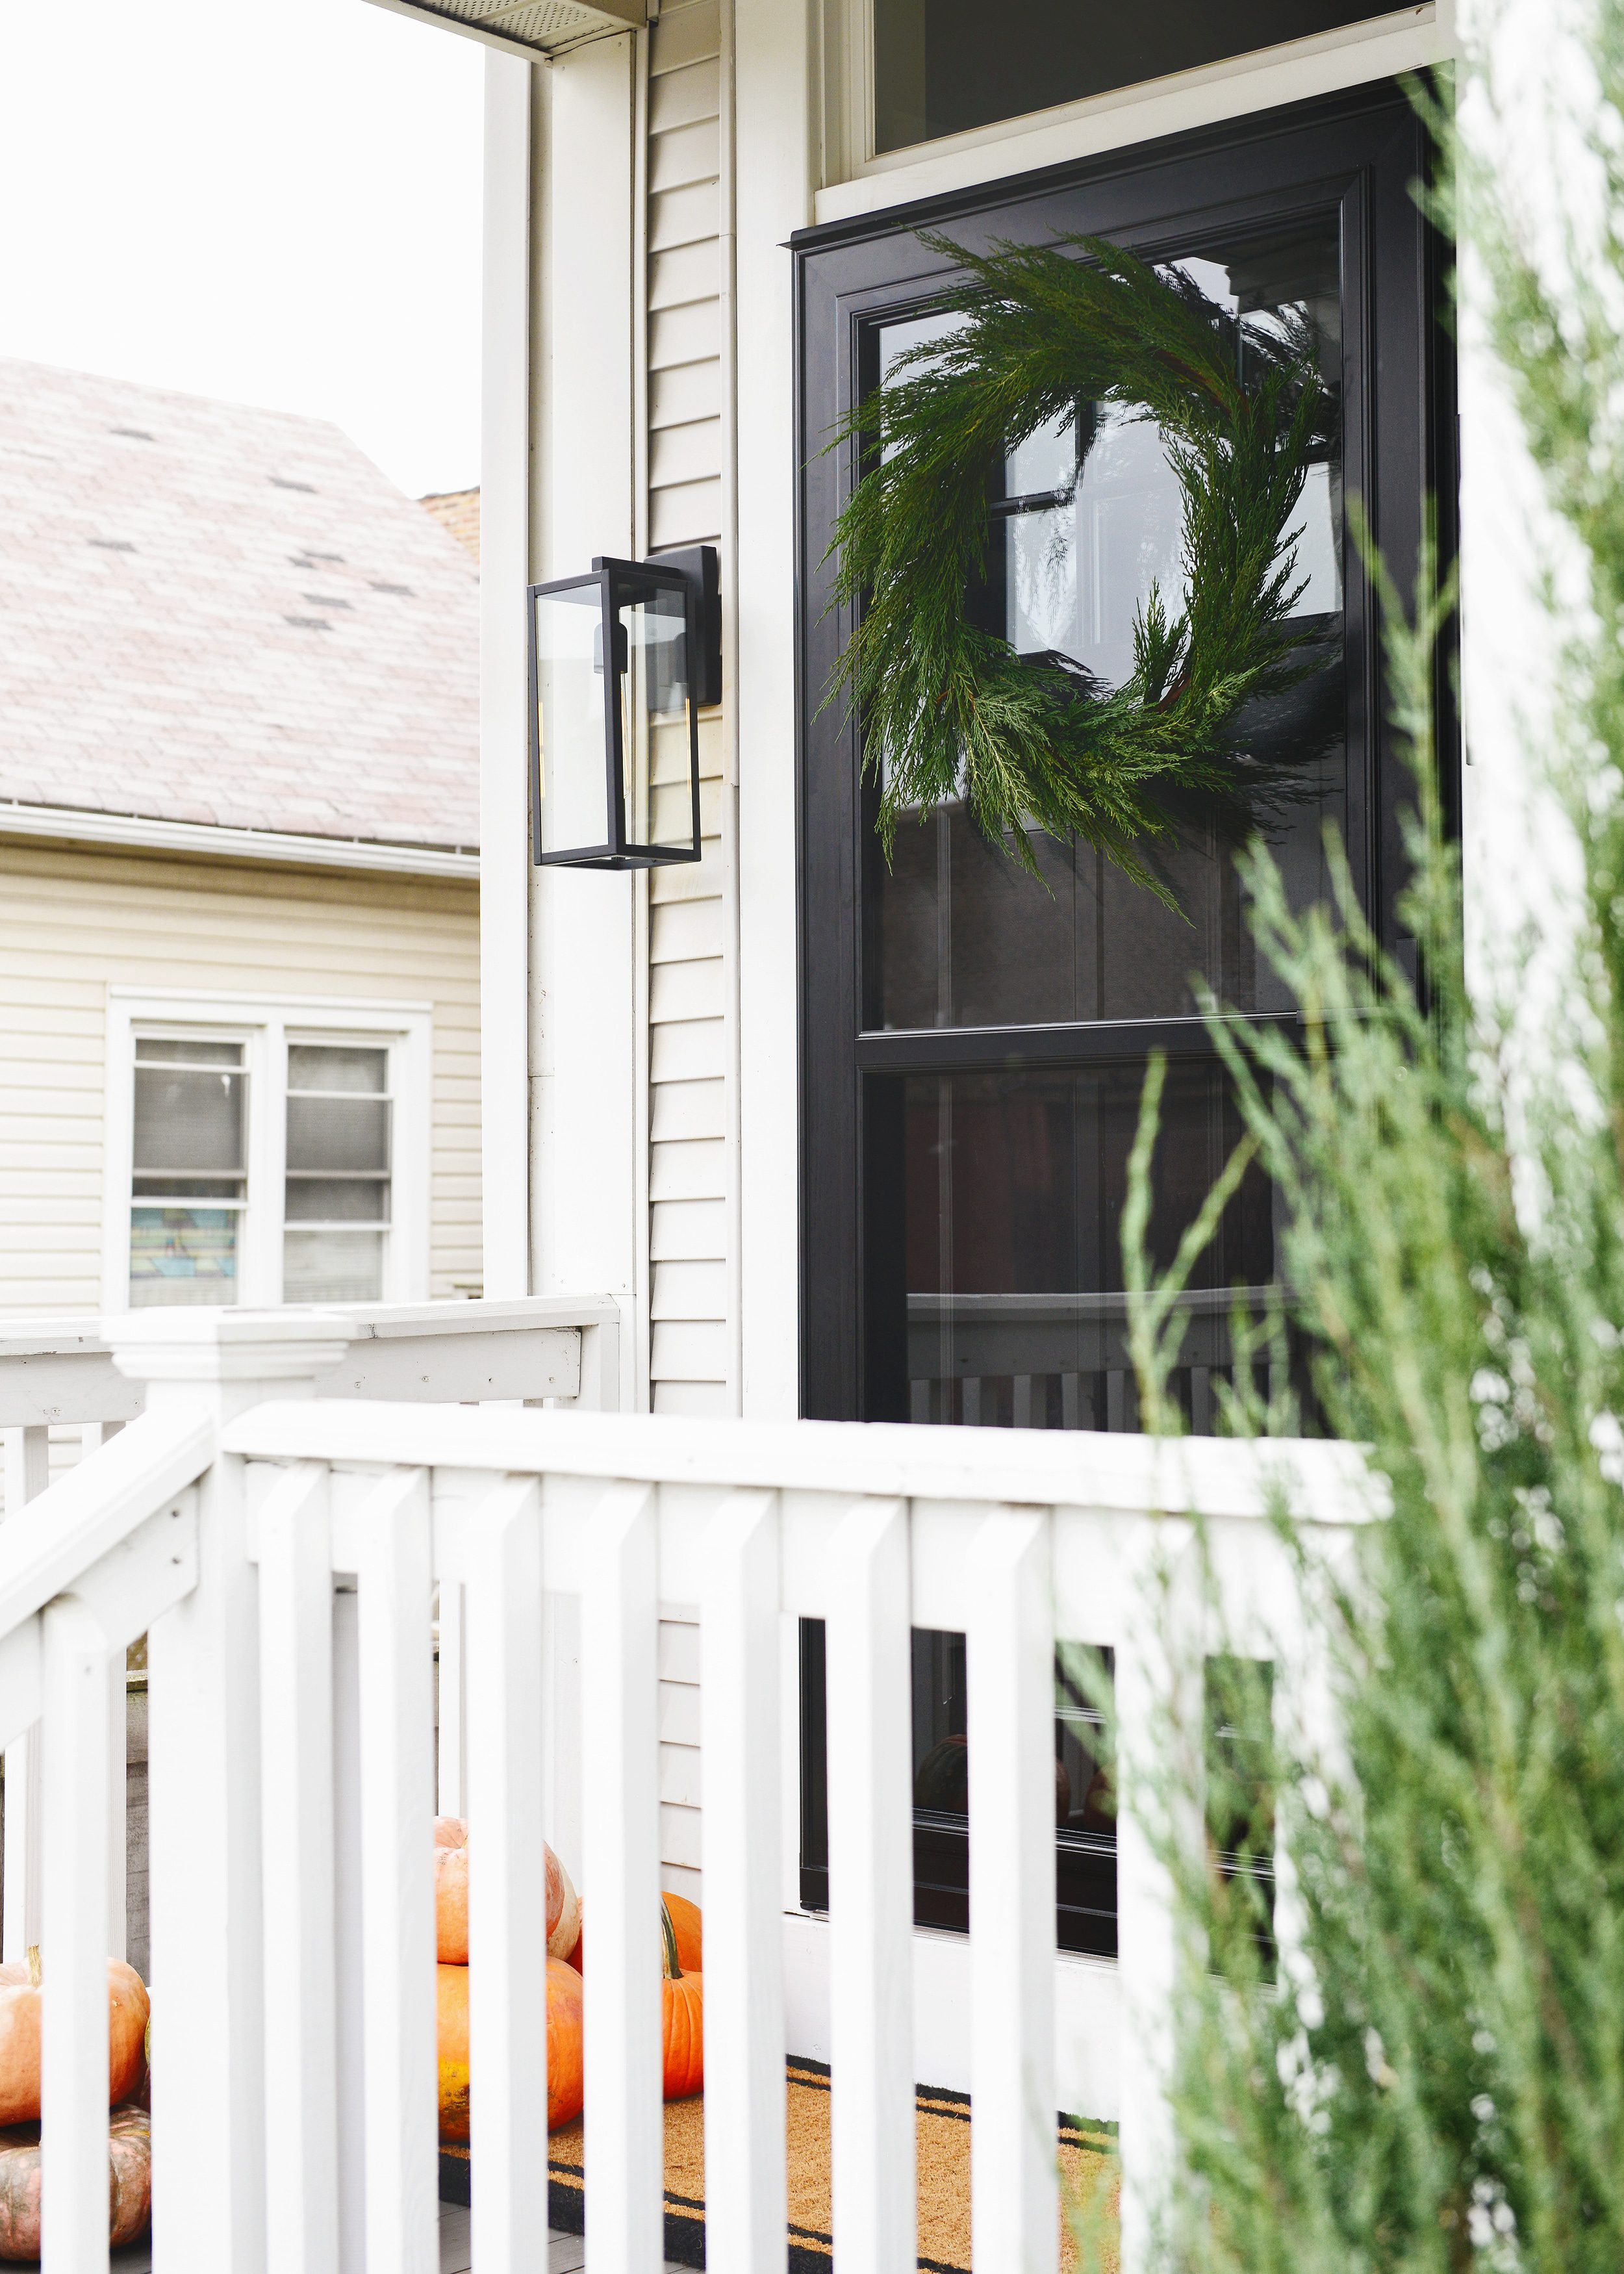 Our front porch today with a black door and black storm door: The 5 ingredients to a fall front porch refresh! via Yellow Brick Home